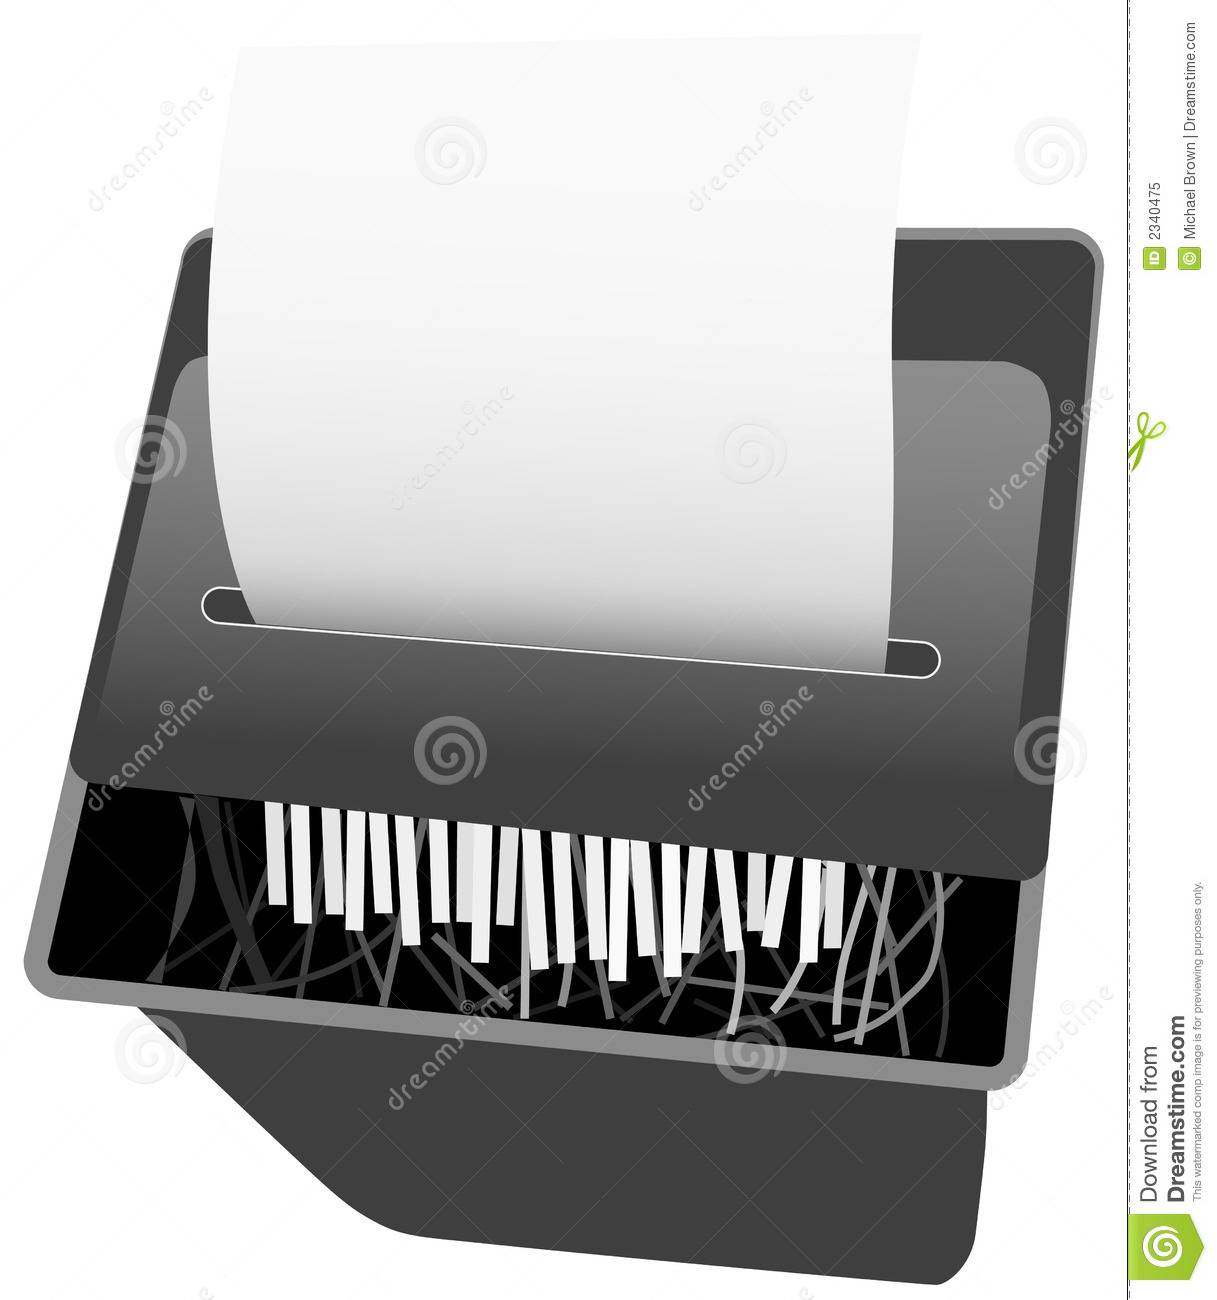 Shred Paper Security Paper Shredder Royalty Free Stock Photo   Image